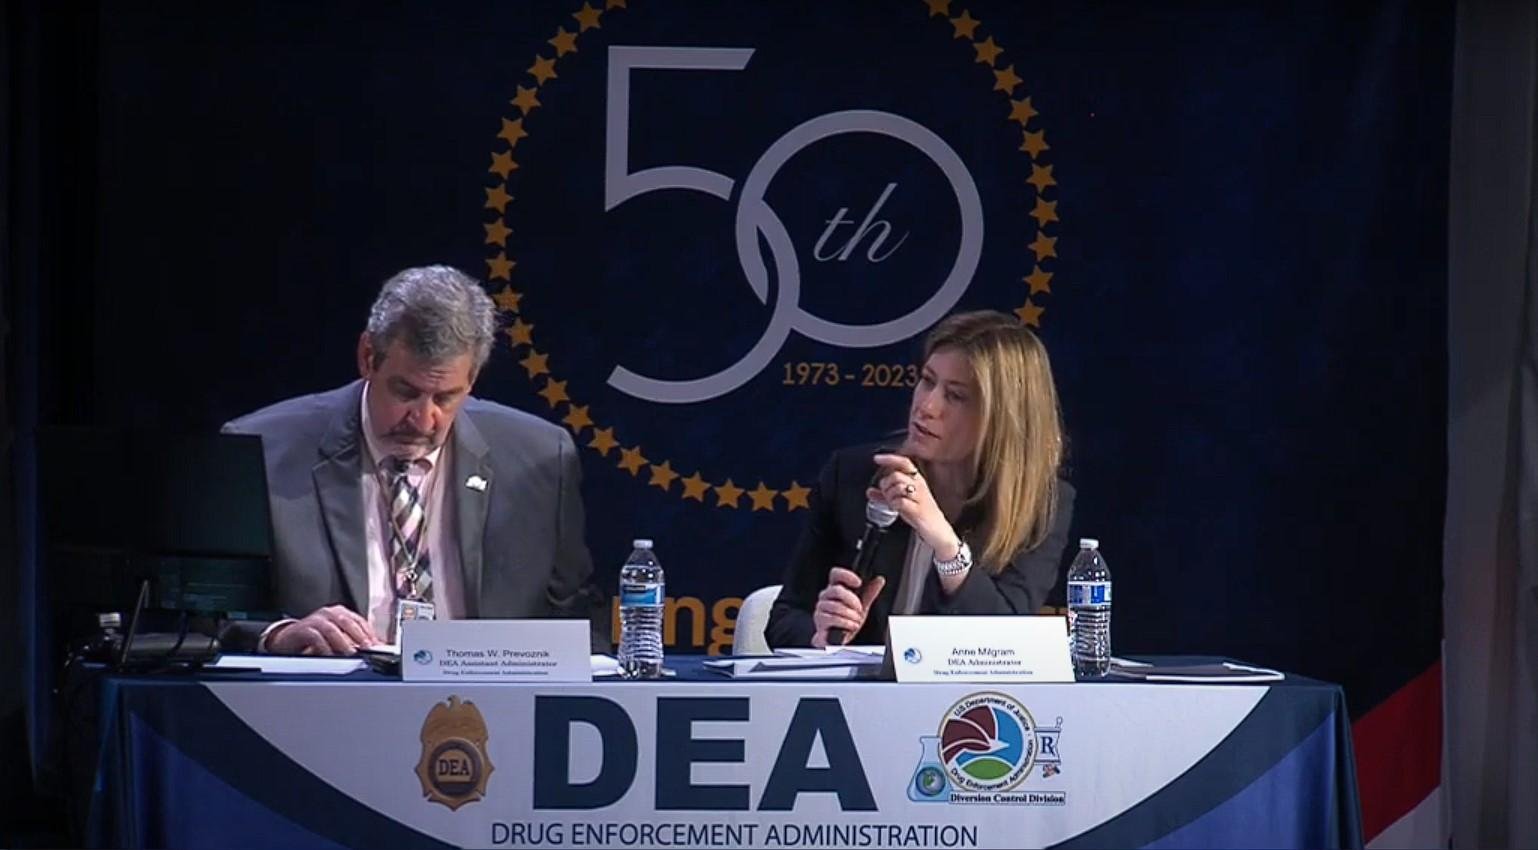 DEA Administrator Anne Milgram and Assistant Administrator Thomas Prevoznik during the DEA Telemedicine Listening Session. Both intently focused on the speakers and reflected genuine concern and interest. The weight of their roles is evident as they actively engage, aiming to understand the complexities and challenges presented by the proposed changes to telemedicine and controlled substance regulations.